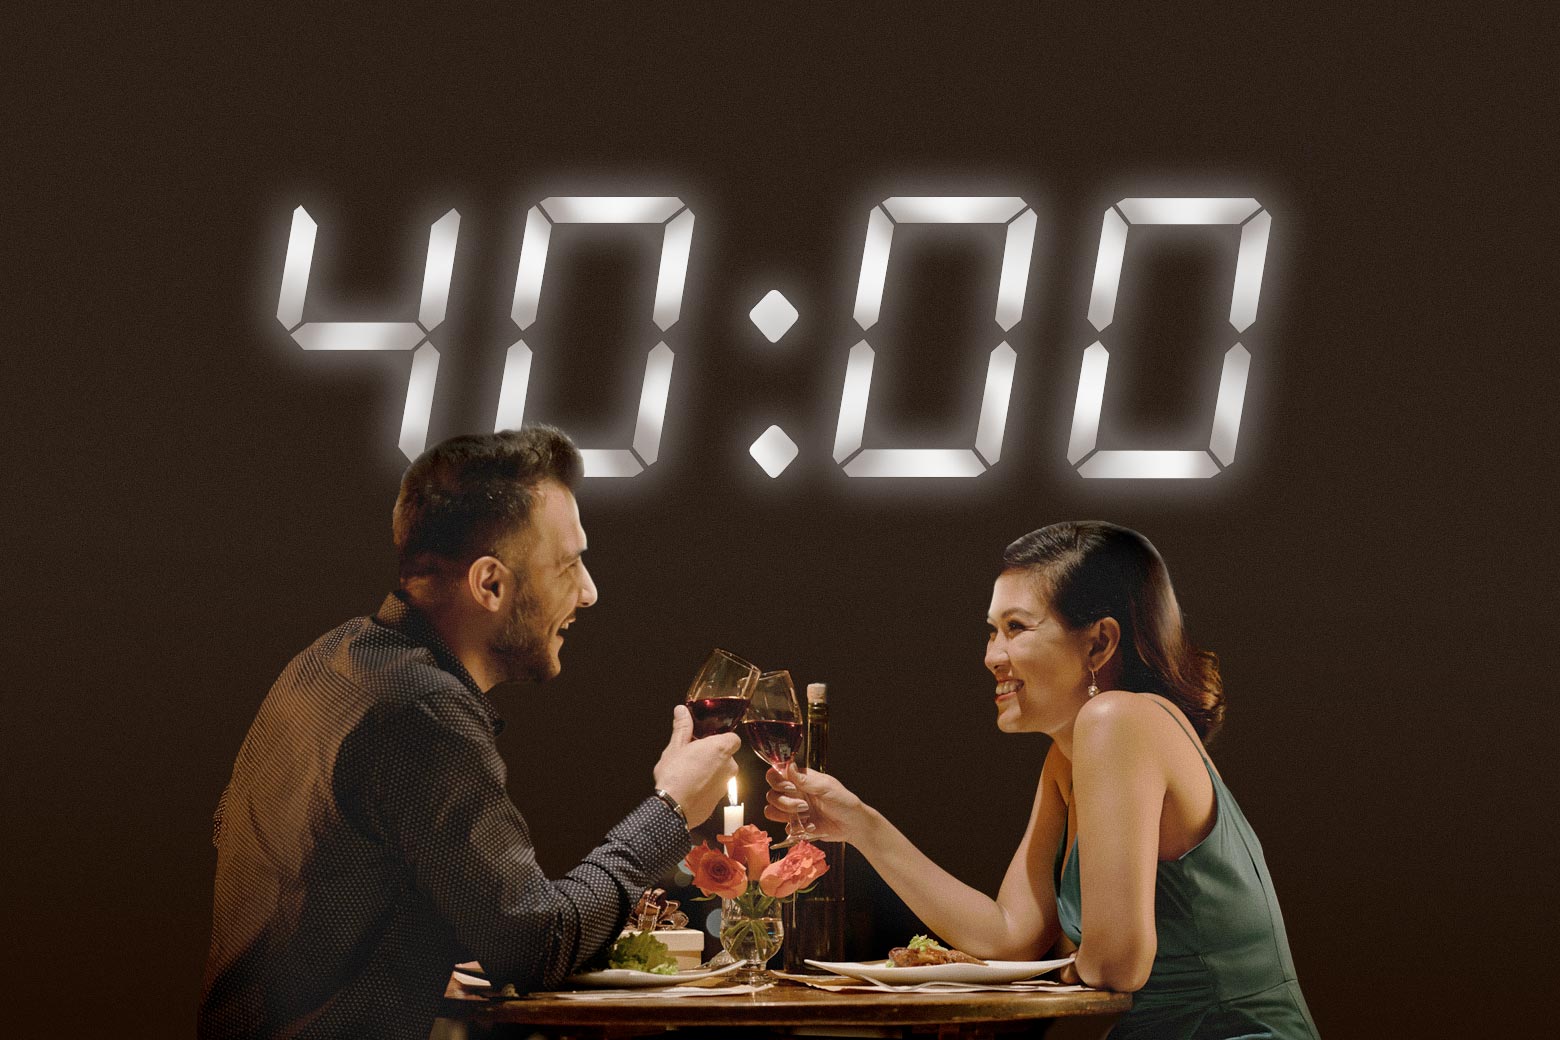 Two people having dinner with a big timer that says "40:00" above them.